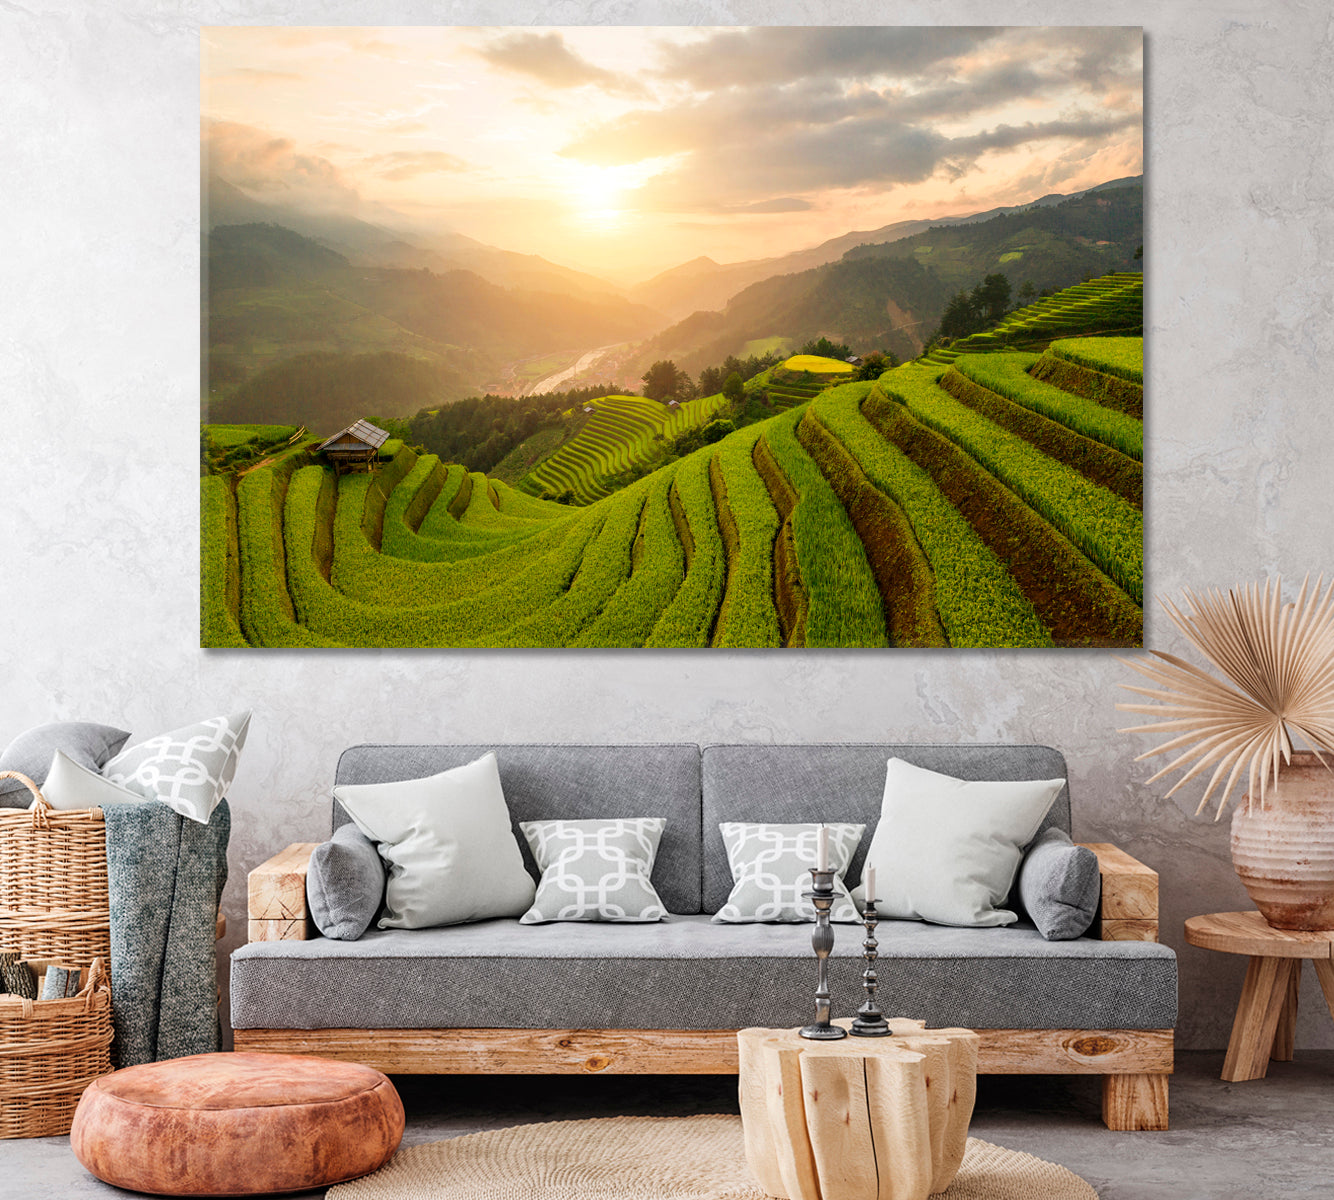 Rice Terraces of Mu Cang Chai Asia Vietnam Canvas Print ArtLexy 1 Panel 24"x16" inches 